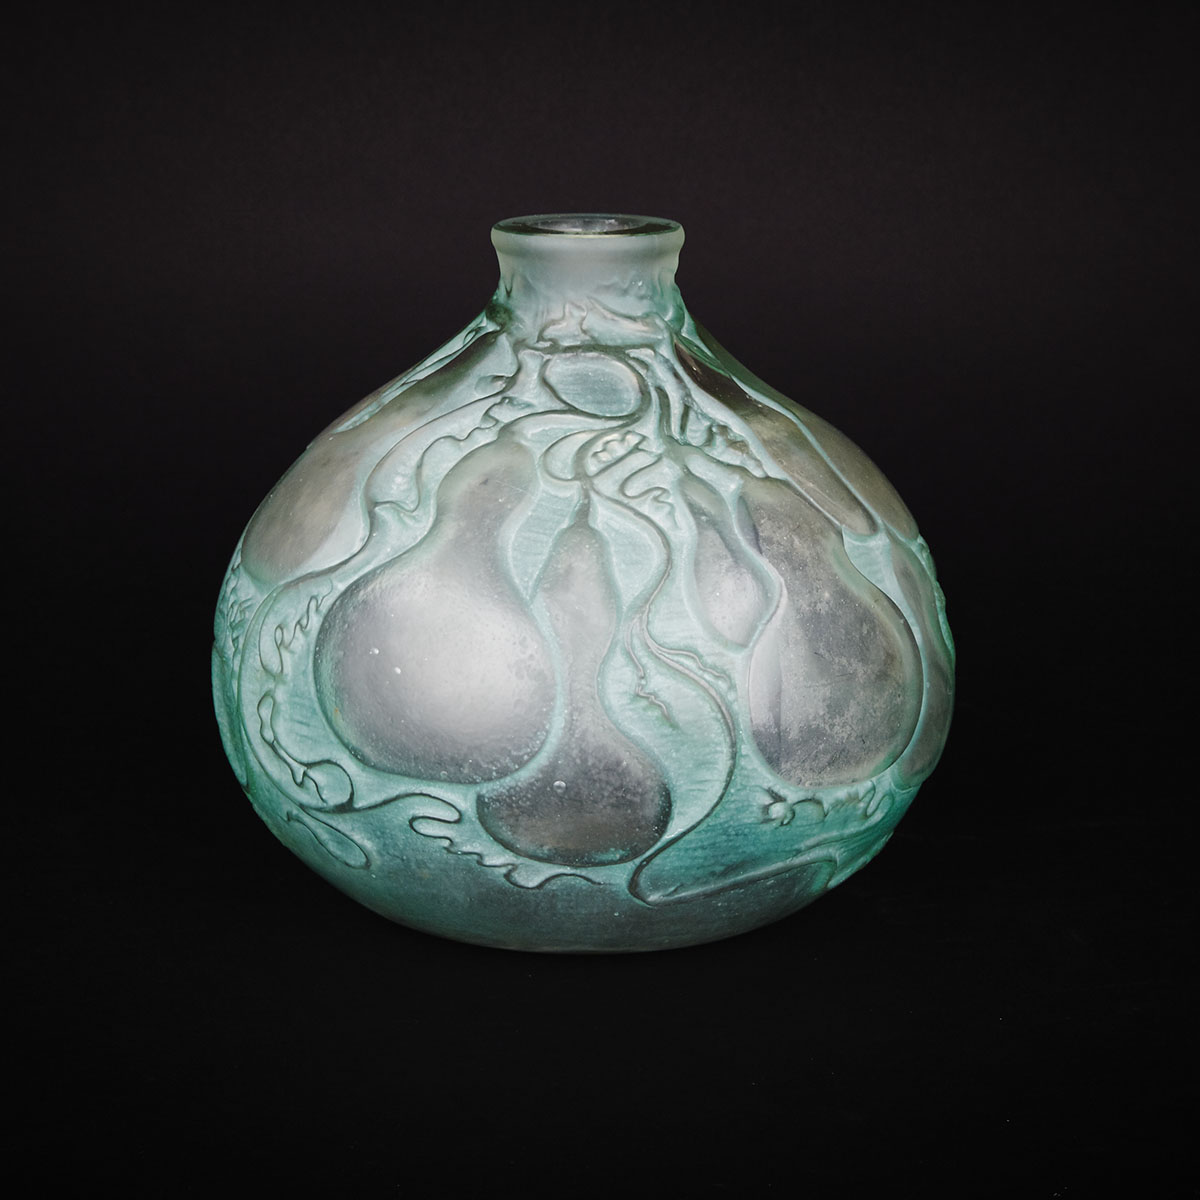 ‘Courges’, Lalique Moulded, Frosted and Green Enameled Glass Vase, c.1920